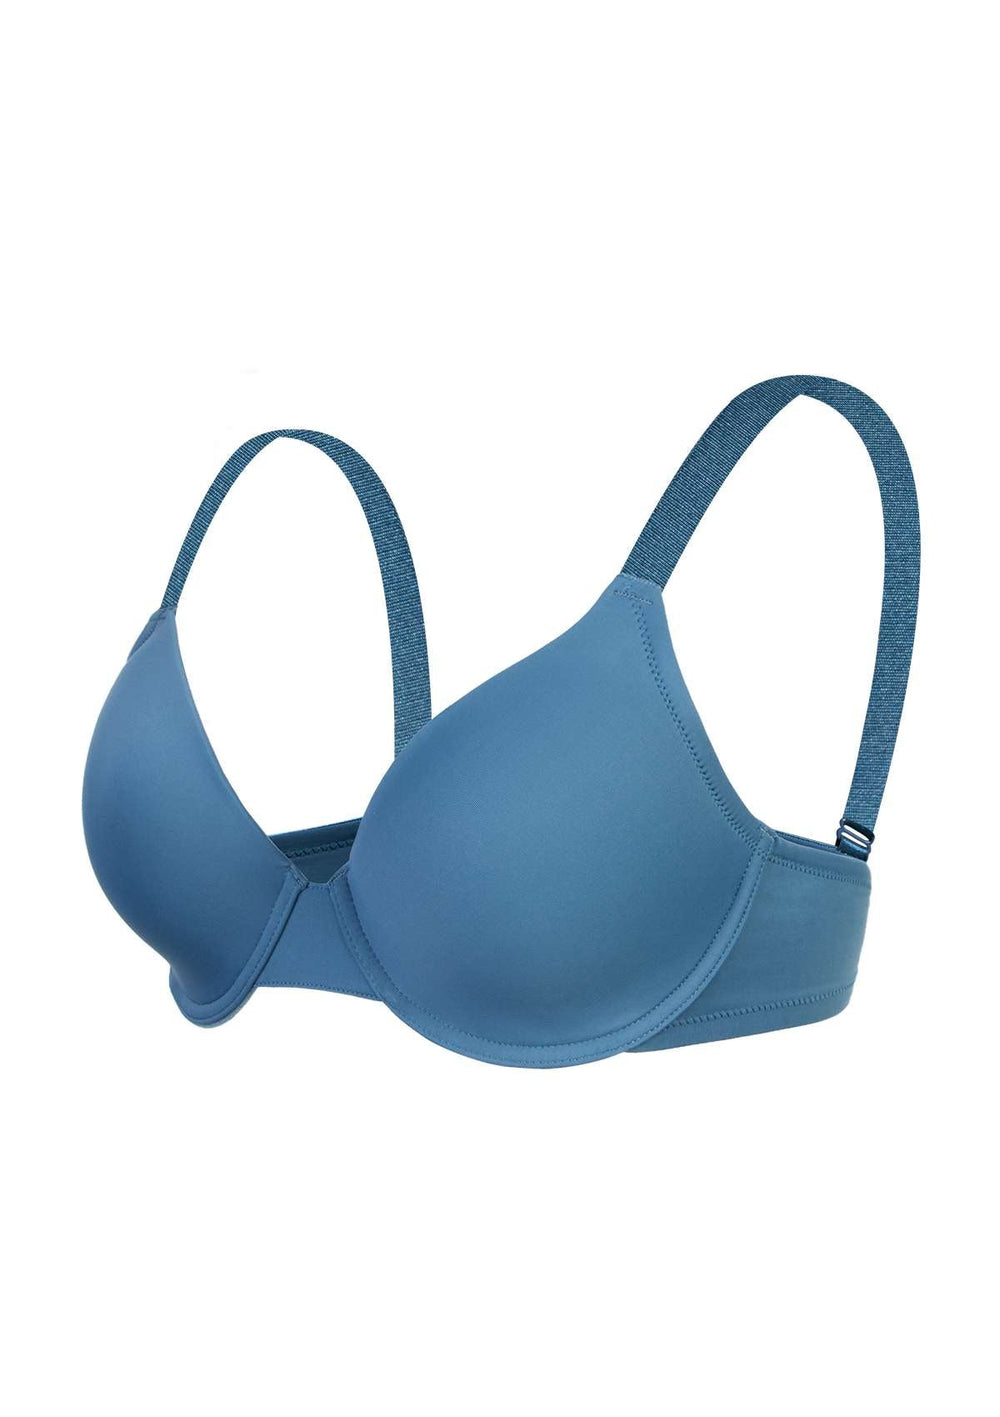 HSIA Smooth Everyday T-shirt Bra For Small Bust